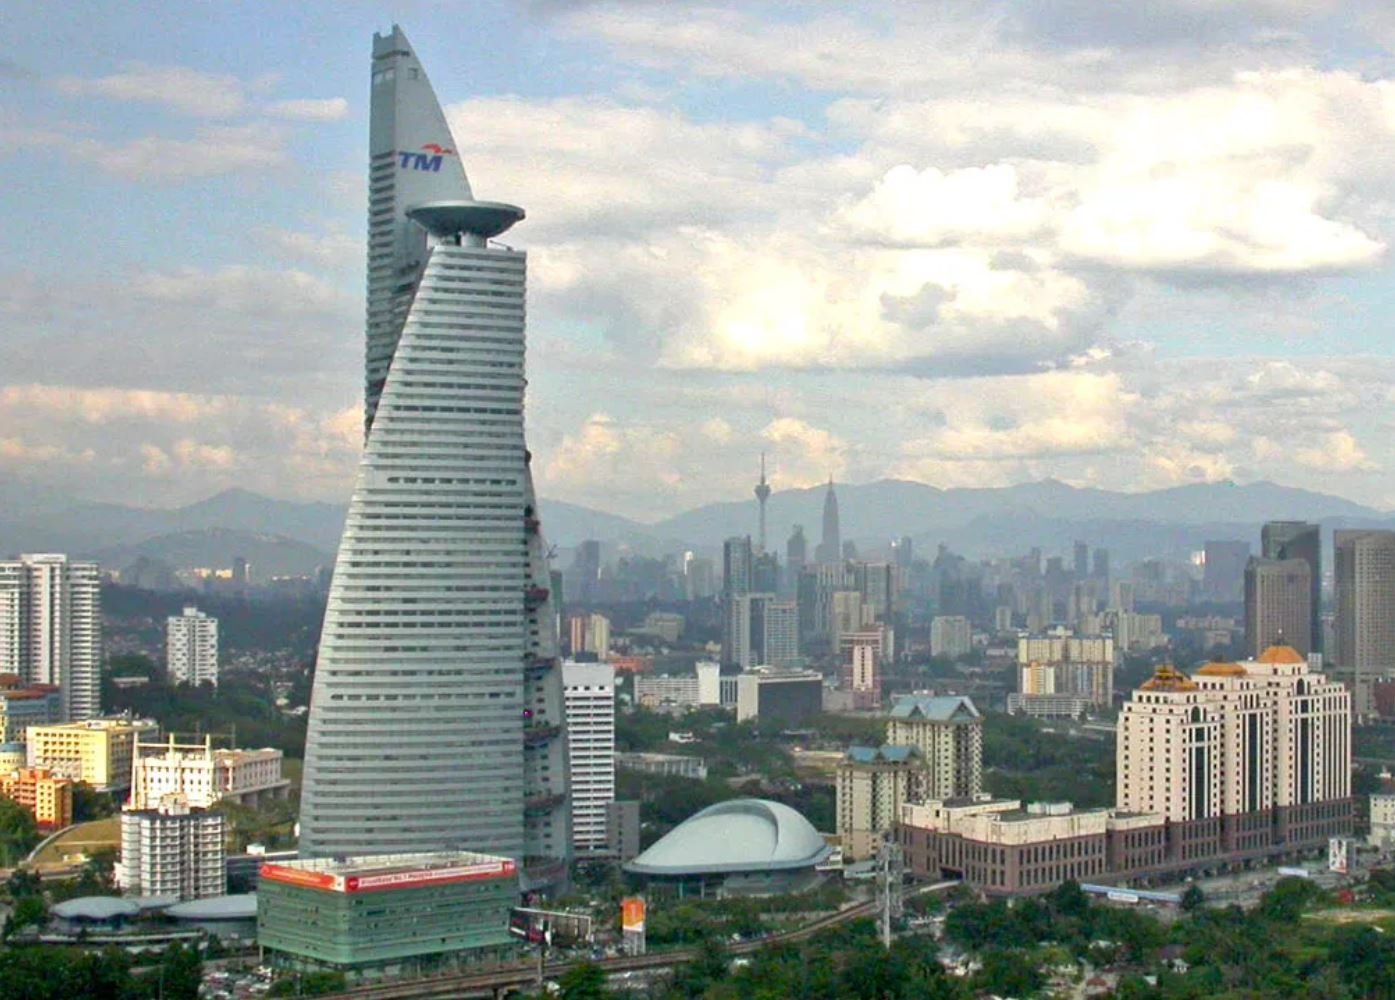 Menara TM was launched by then-Prime Minister Tun Dr Mahathir Mohamad in 2003. 